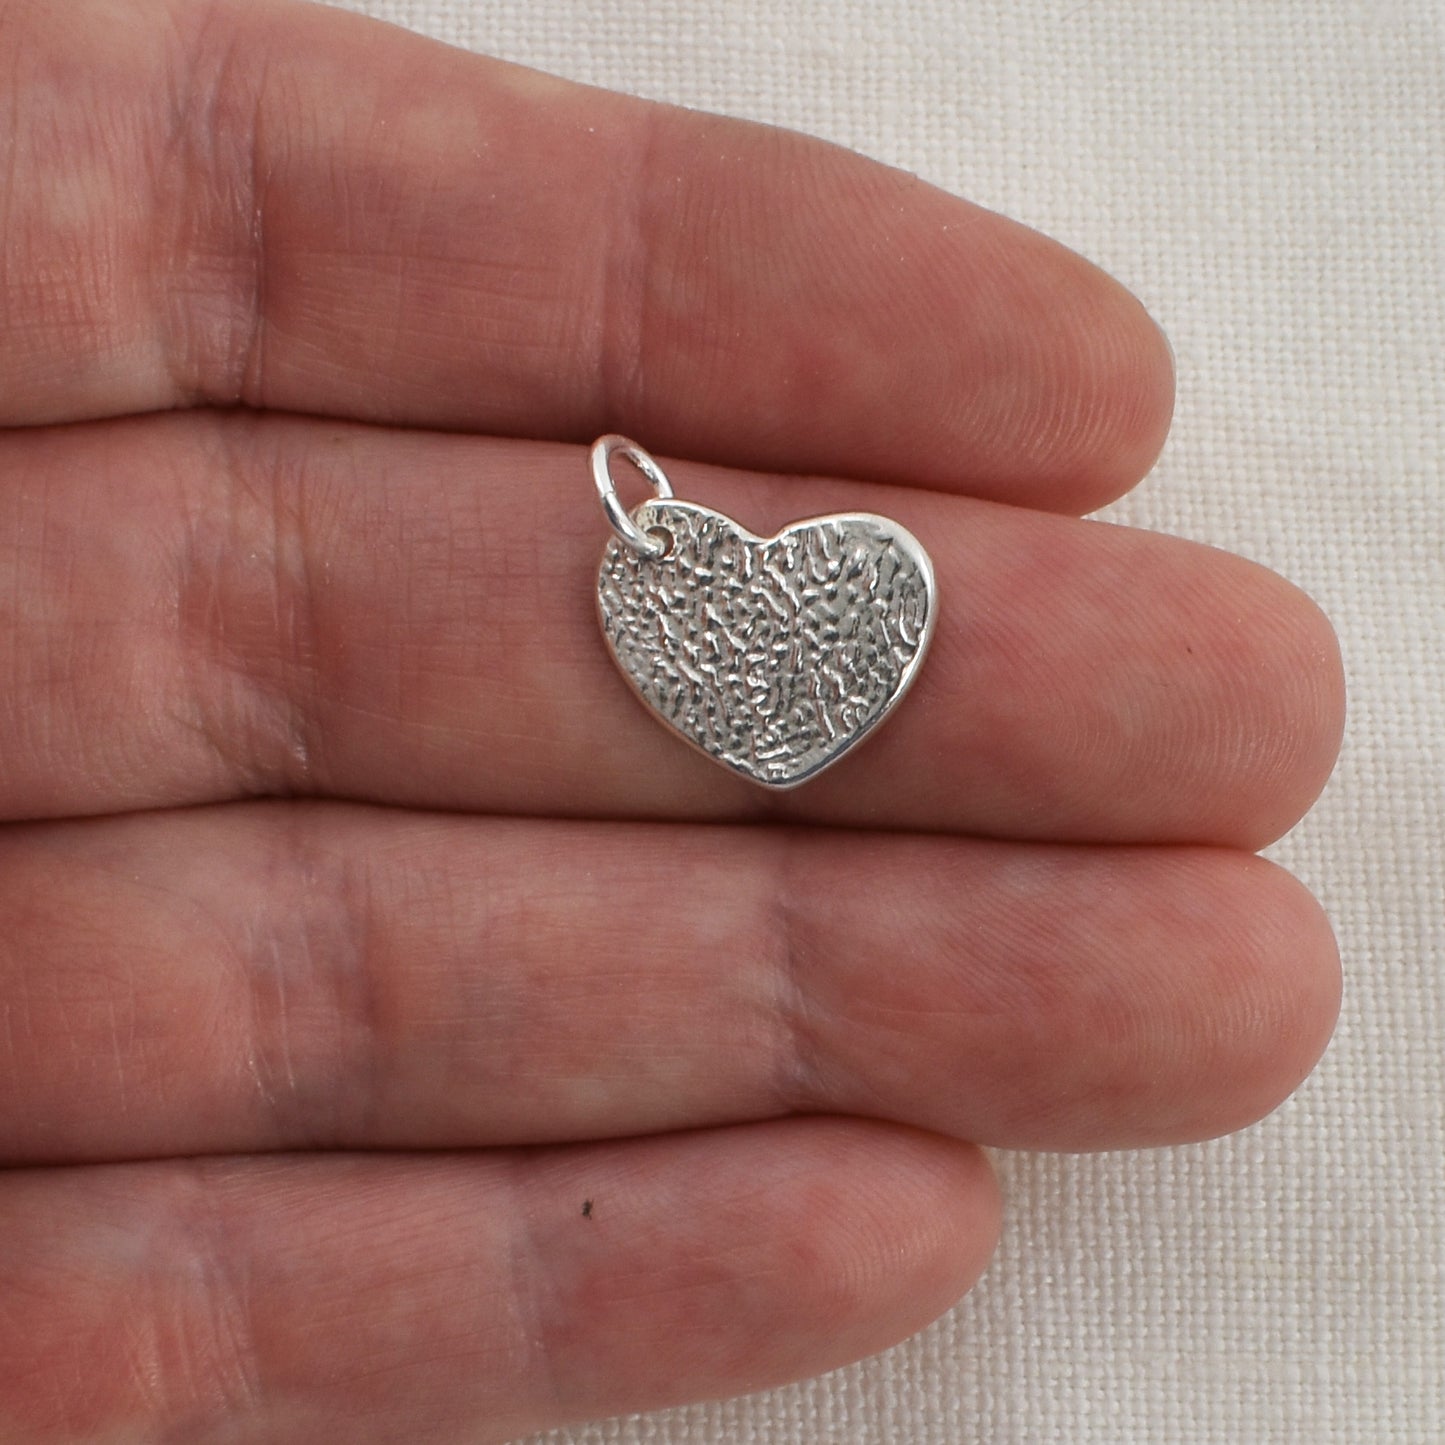 Cat Nose Textured Heart Pendant on Finger for Size Reference